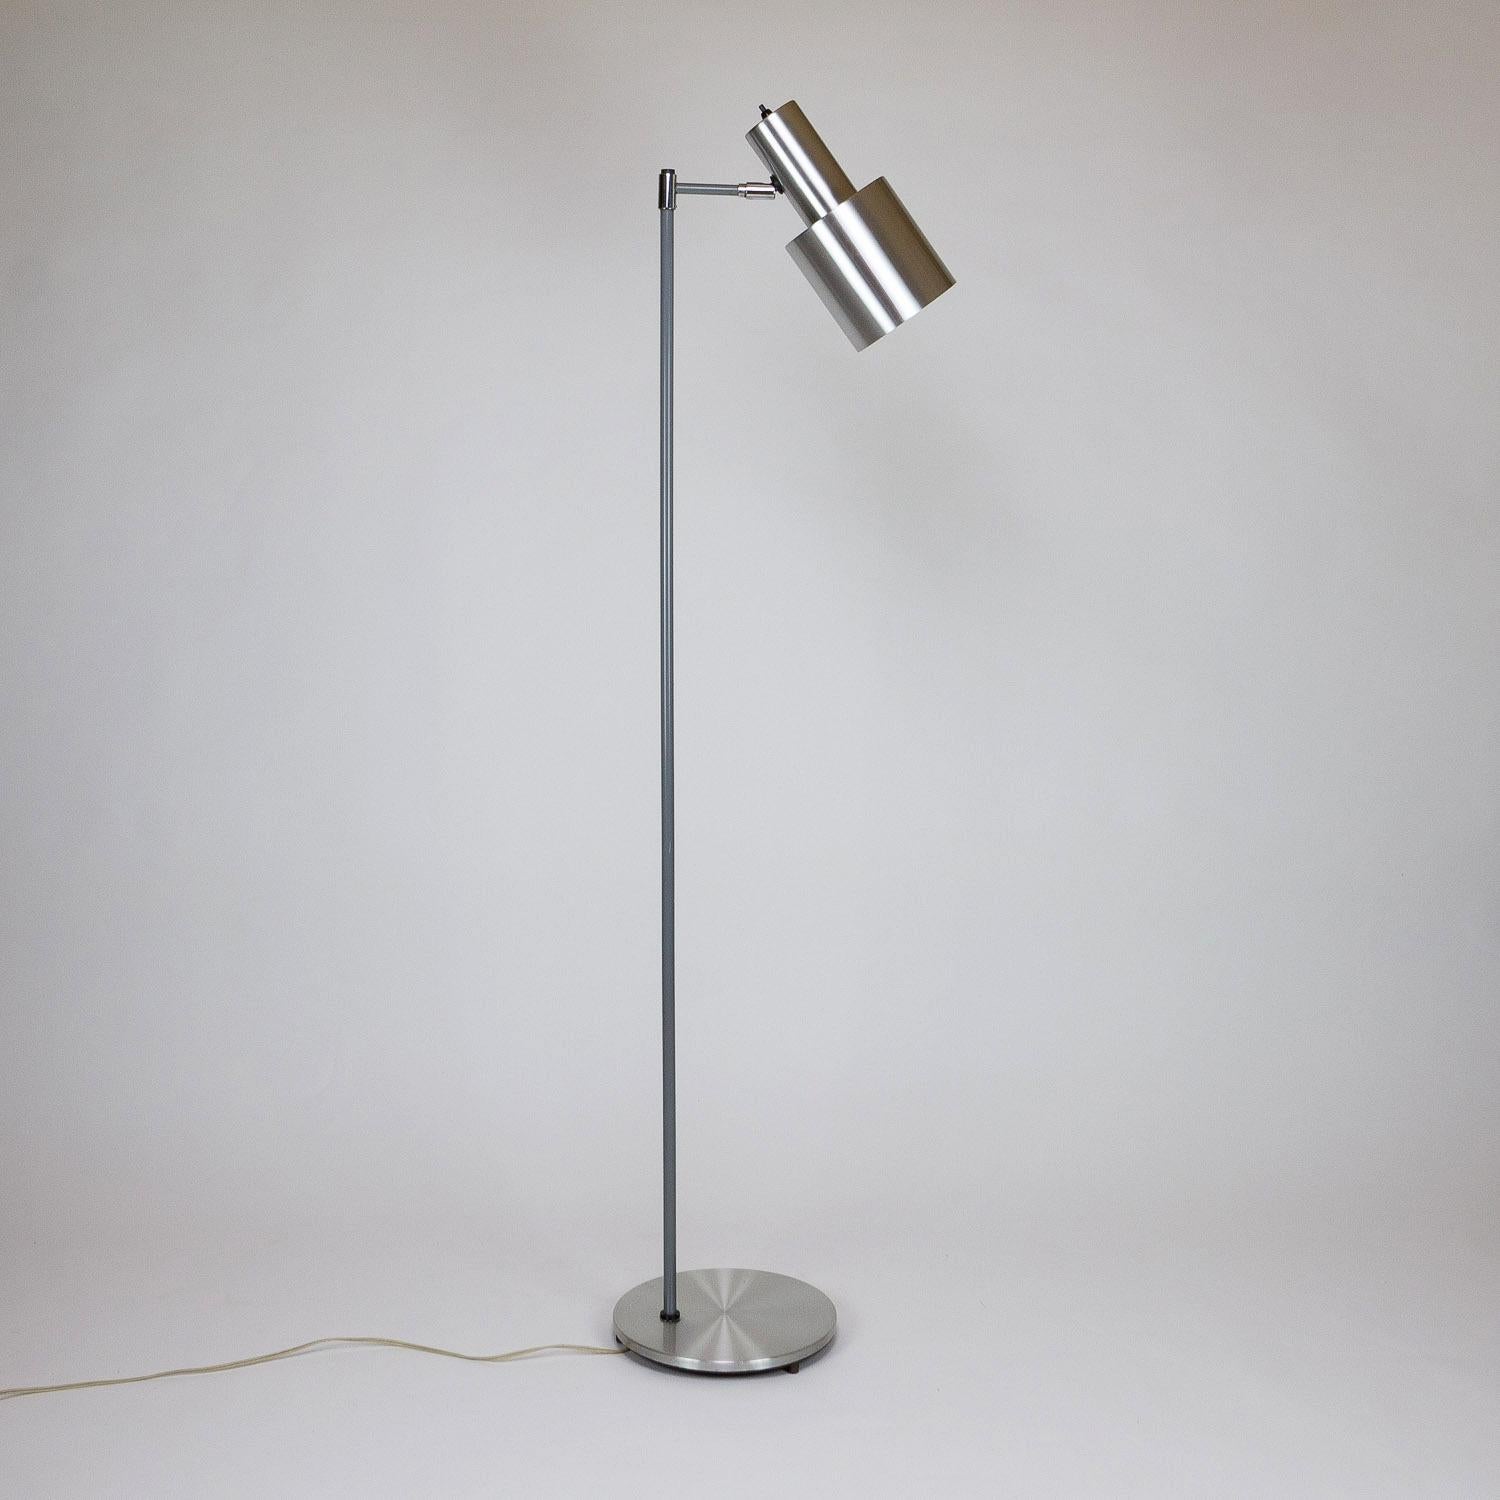 Studio floor lamp with spun aluminum adjustable shade and base with grey coated metal leg. Designed by Jo Hammerborg for Fog & Mørup, Denmark in 1963. Scuffs and scratches on the shade.

    